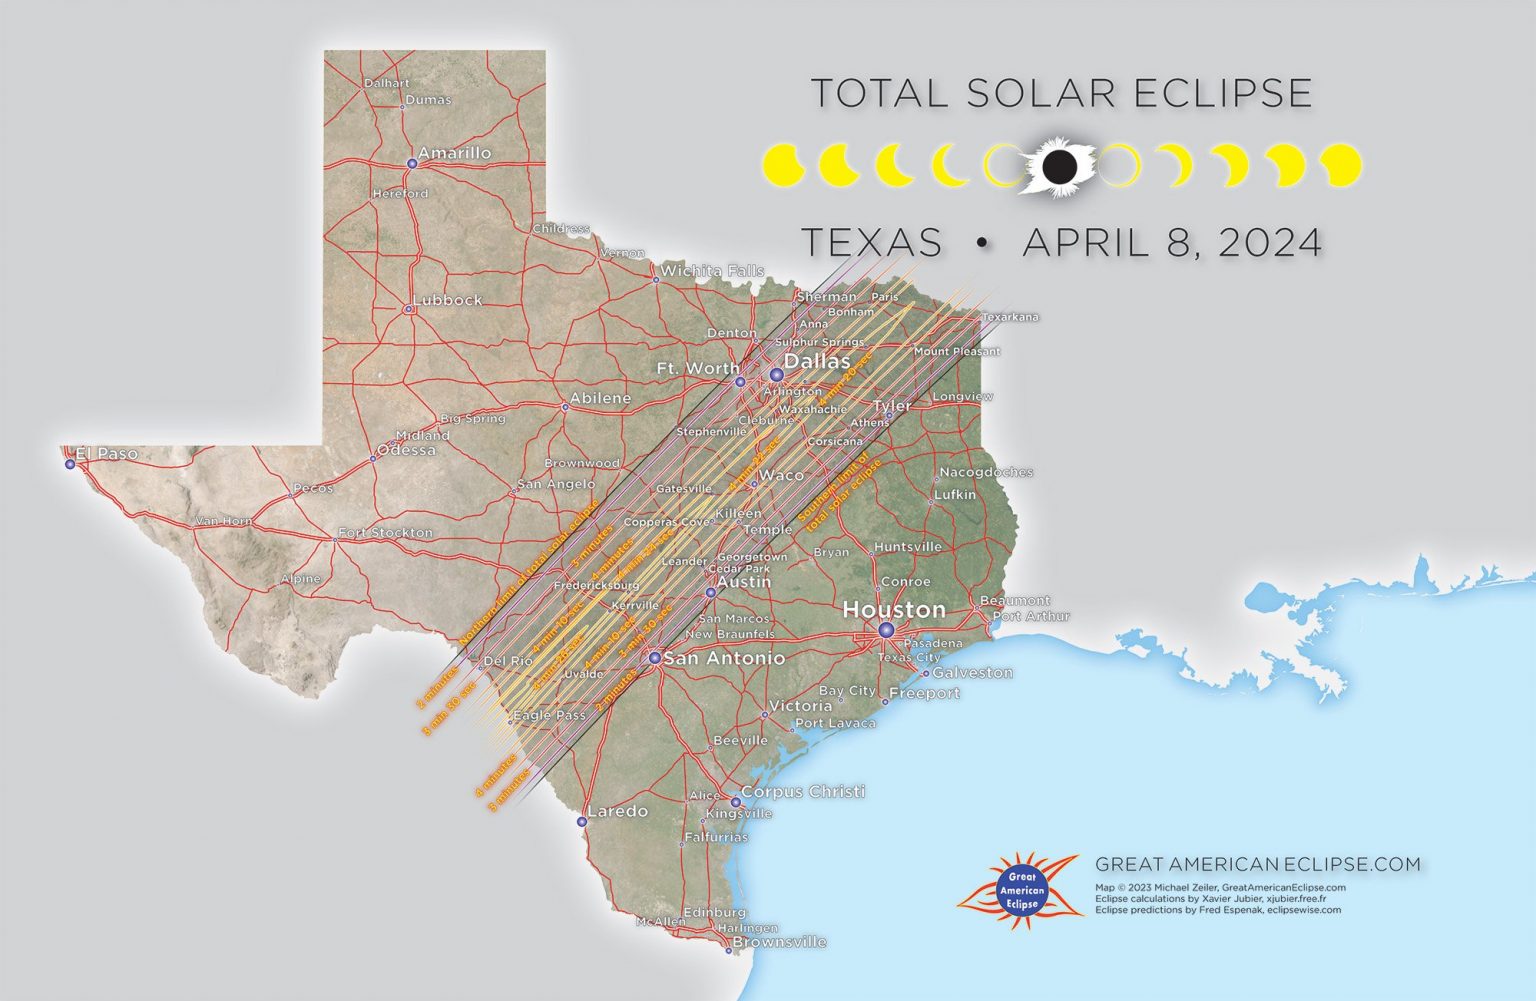 Texas Gears Up for a Total Solar Eclipse to Span the Length of the